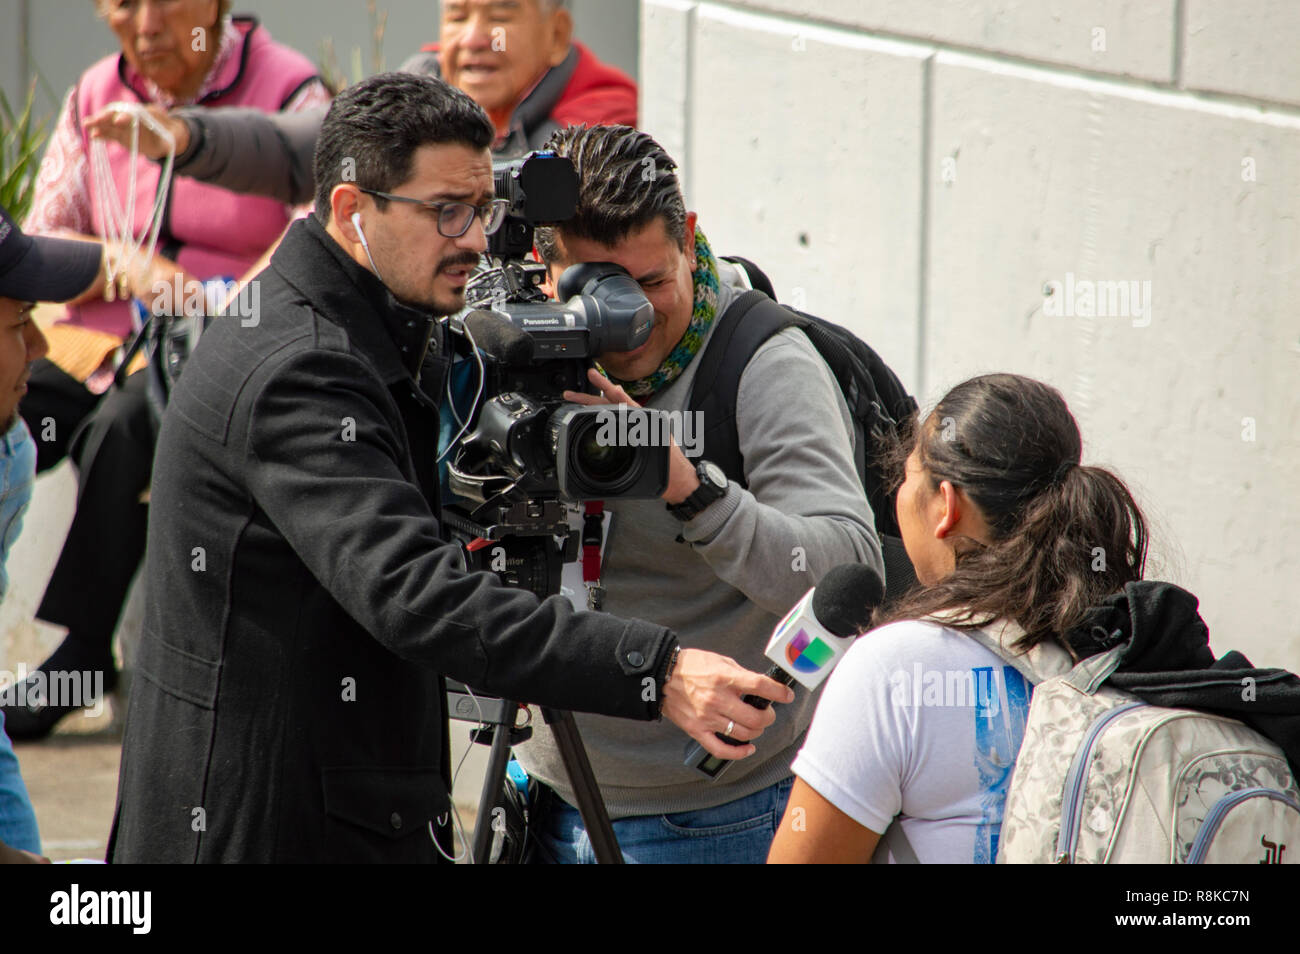 An interview during the pilgrimage to the Basilica of Our Lady of Guadalupe in Mexico City, Mexico Stock Photo